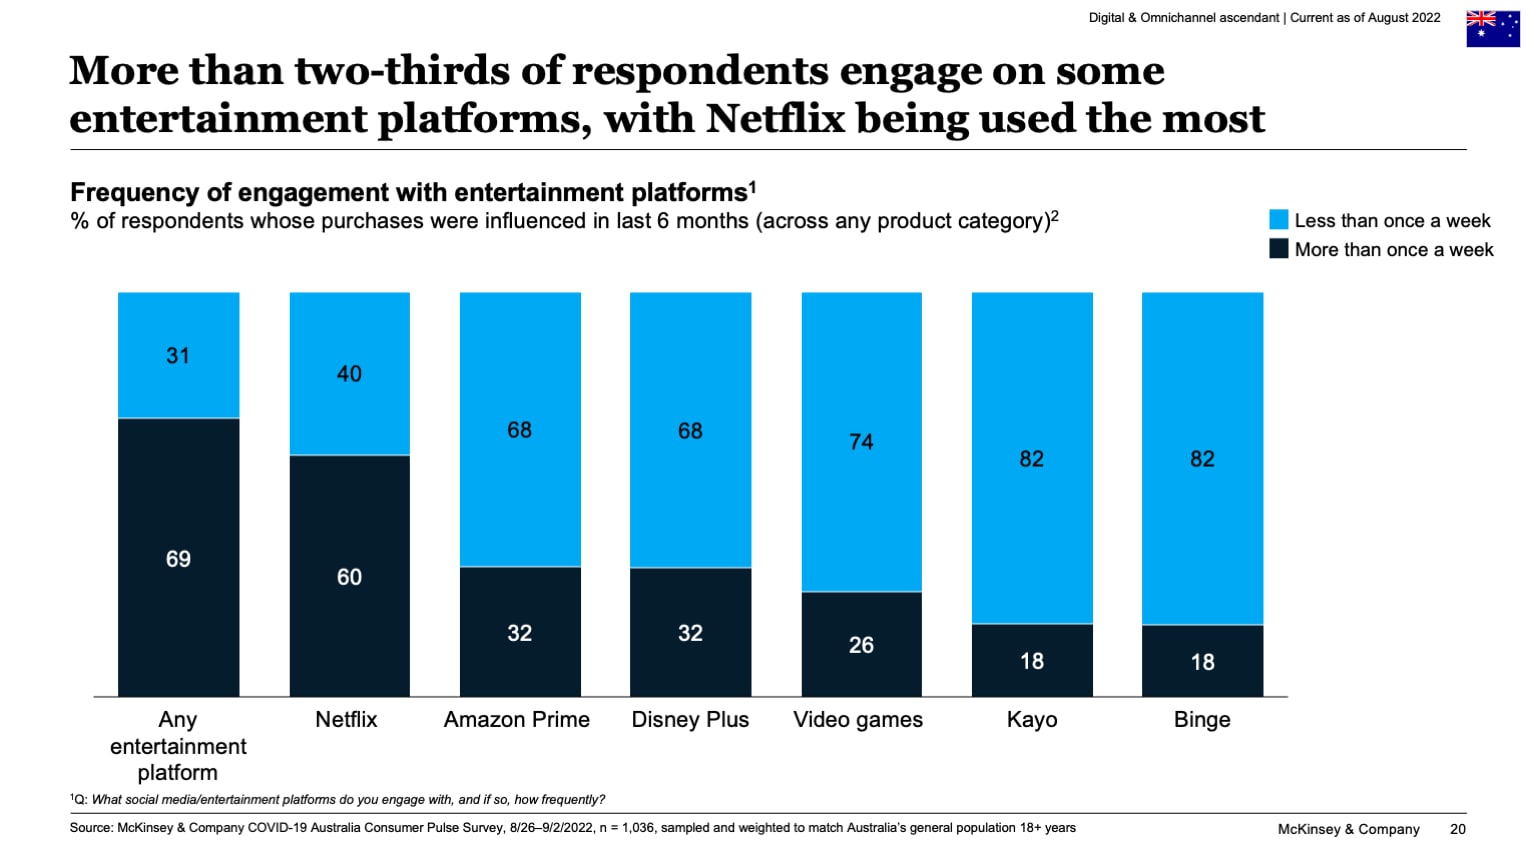 More than two-thirds of respondents engage on some entertainment platforms, with Netflix being used the most